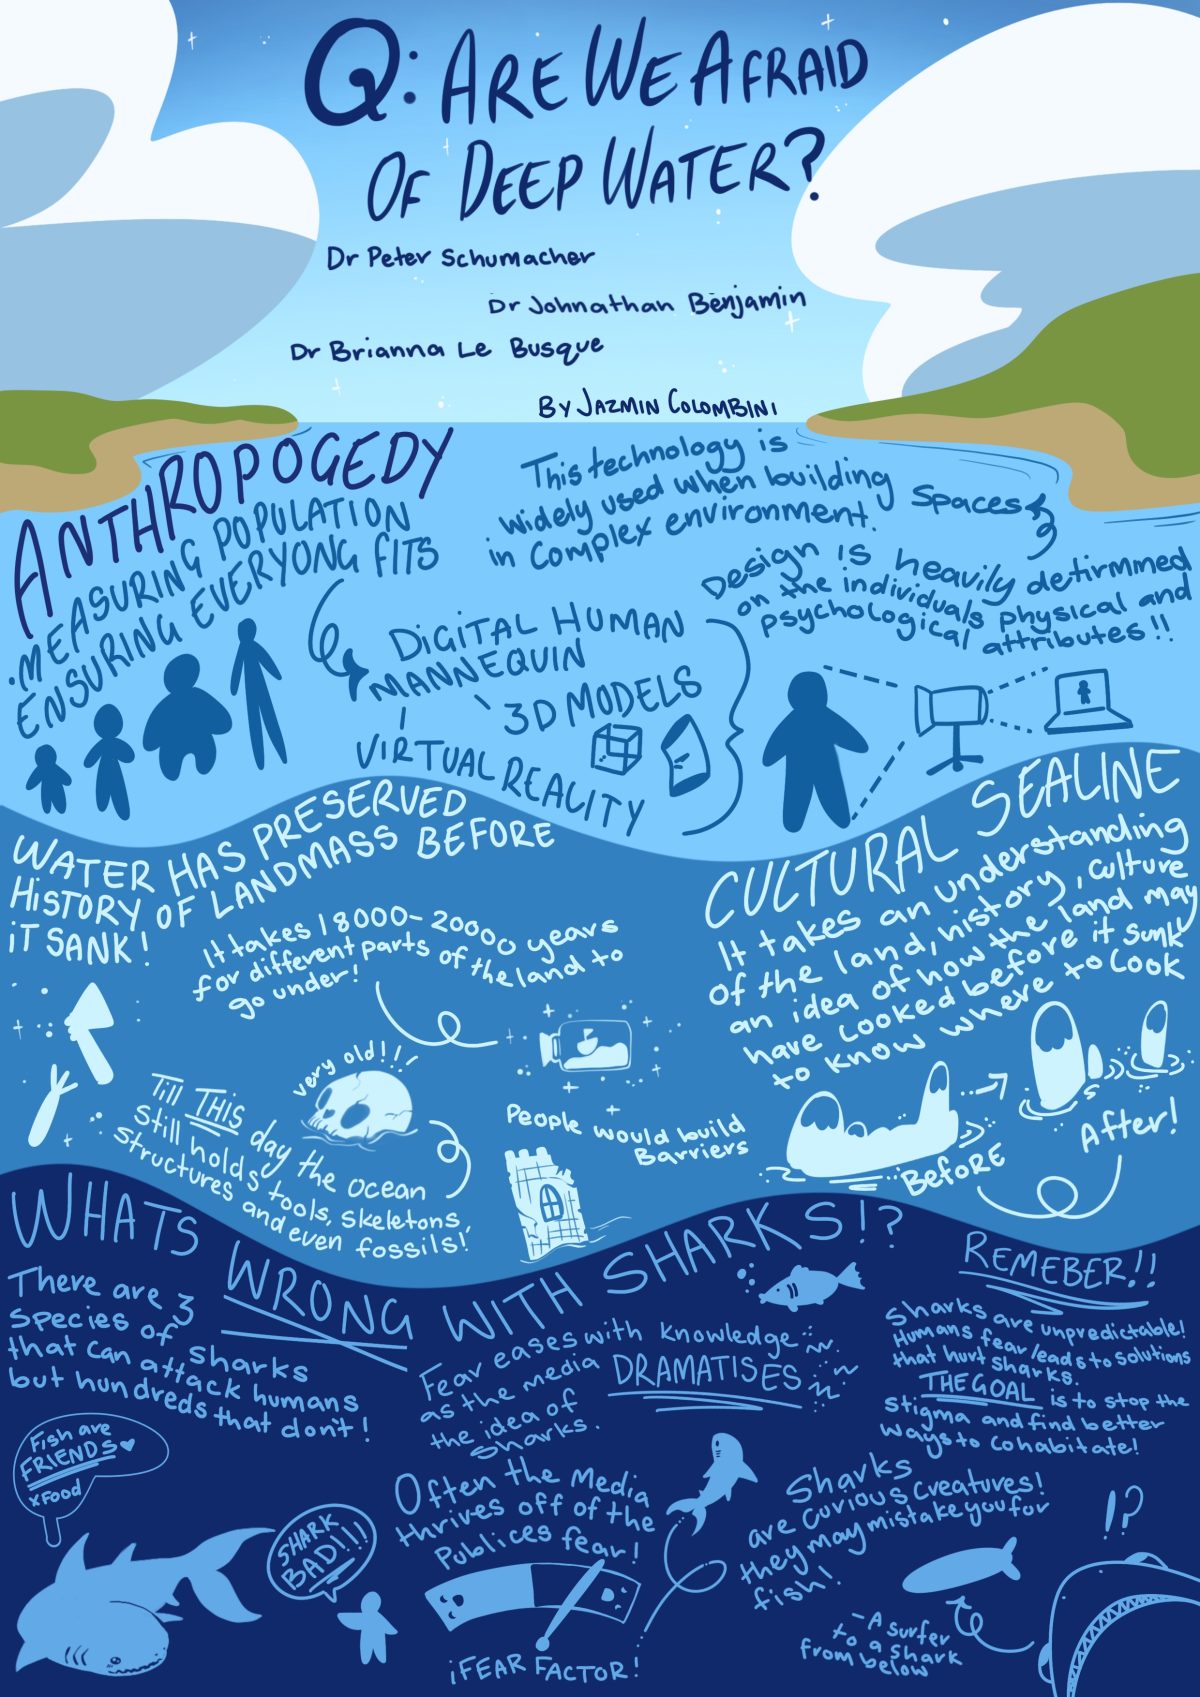 A graphic recording of the q: are we afraid of deep water? event. Containing illustrations of sharks, people and icebergs